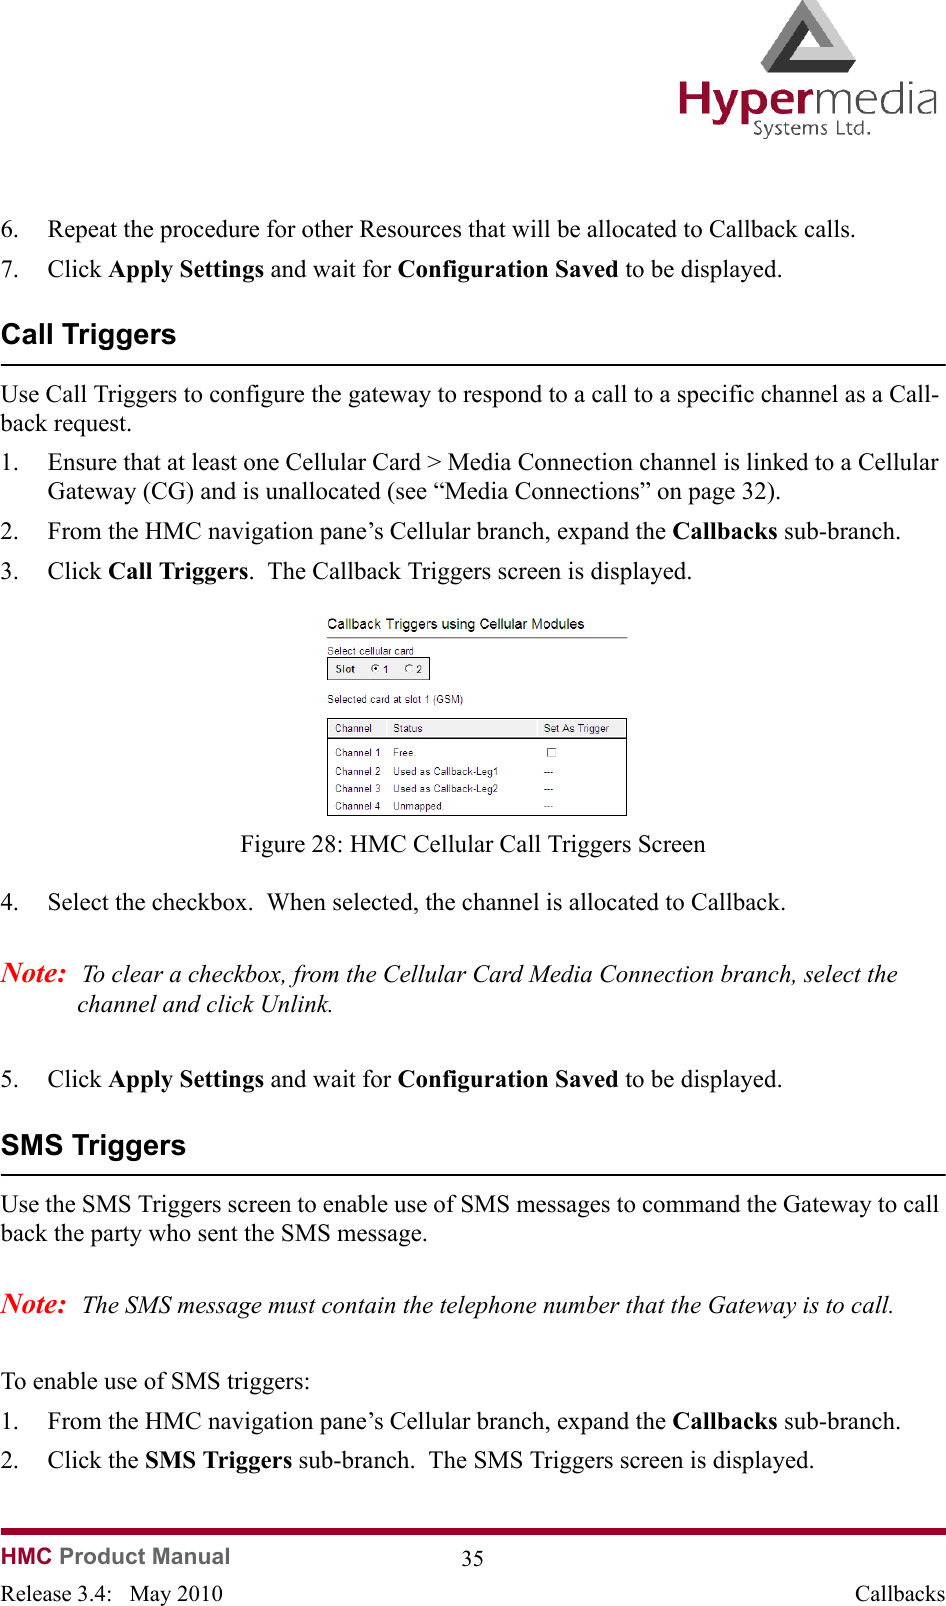 HMC Product Manual  35Release 3.4:   May 2010 Callbacks6. Repeat the procedure for other Resources that will be allocated to Callback calls.7. Click Apply Settings and wait for Configuration Saved to be displayed.Call TriggersUse Call Triggers to configure the gateway to respond to a call to a specific channel as a Call-back request.1. Ensure that at least one Cellular Card &gt; Media Connection channel is linked to a Cellular Gateway (CG) and is unallocated (see “Media Connections” on page 32).2. From the HMC navigation pane’s Cellular branch, expand the Callbacks sub-branch.  3. Click Call Triggers.  The Callback Triggers screen is displayed.              Figure 28: HMC Cellular Call Triggers Screen4. Select the checkbox.  When selected, the channel is allocated to Callback.Note:  To clear a checkbox, from the Cellular Card Media Connection branch, select the channel and click Unlink.5. Click Apply Settings and wait for Configuration Saved to be displayed.  SMS TriggersUse the SMS Triggers screen to enable use of SMS messages to command the Gateway to call back the party who sent the SMS message.Note:  The SMS message must contain the telephone number that the Gateway is to call.To enable use of SMS triggers:1. From the HMC navigation pane’s Cellular branch, expand the Callbacks sub-branch.  2. Click the SMS Triggers sub-branch.  The SMS Triggers screen is displayed.